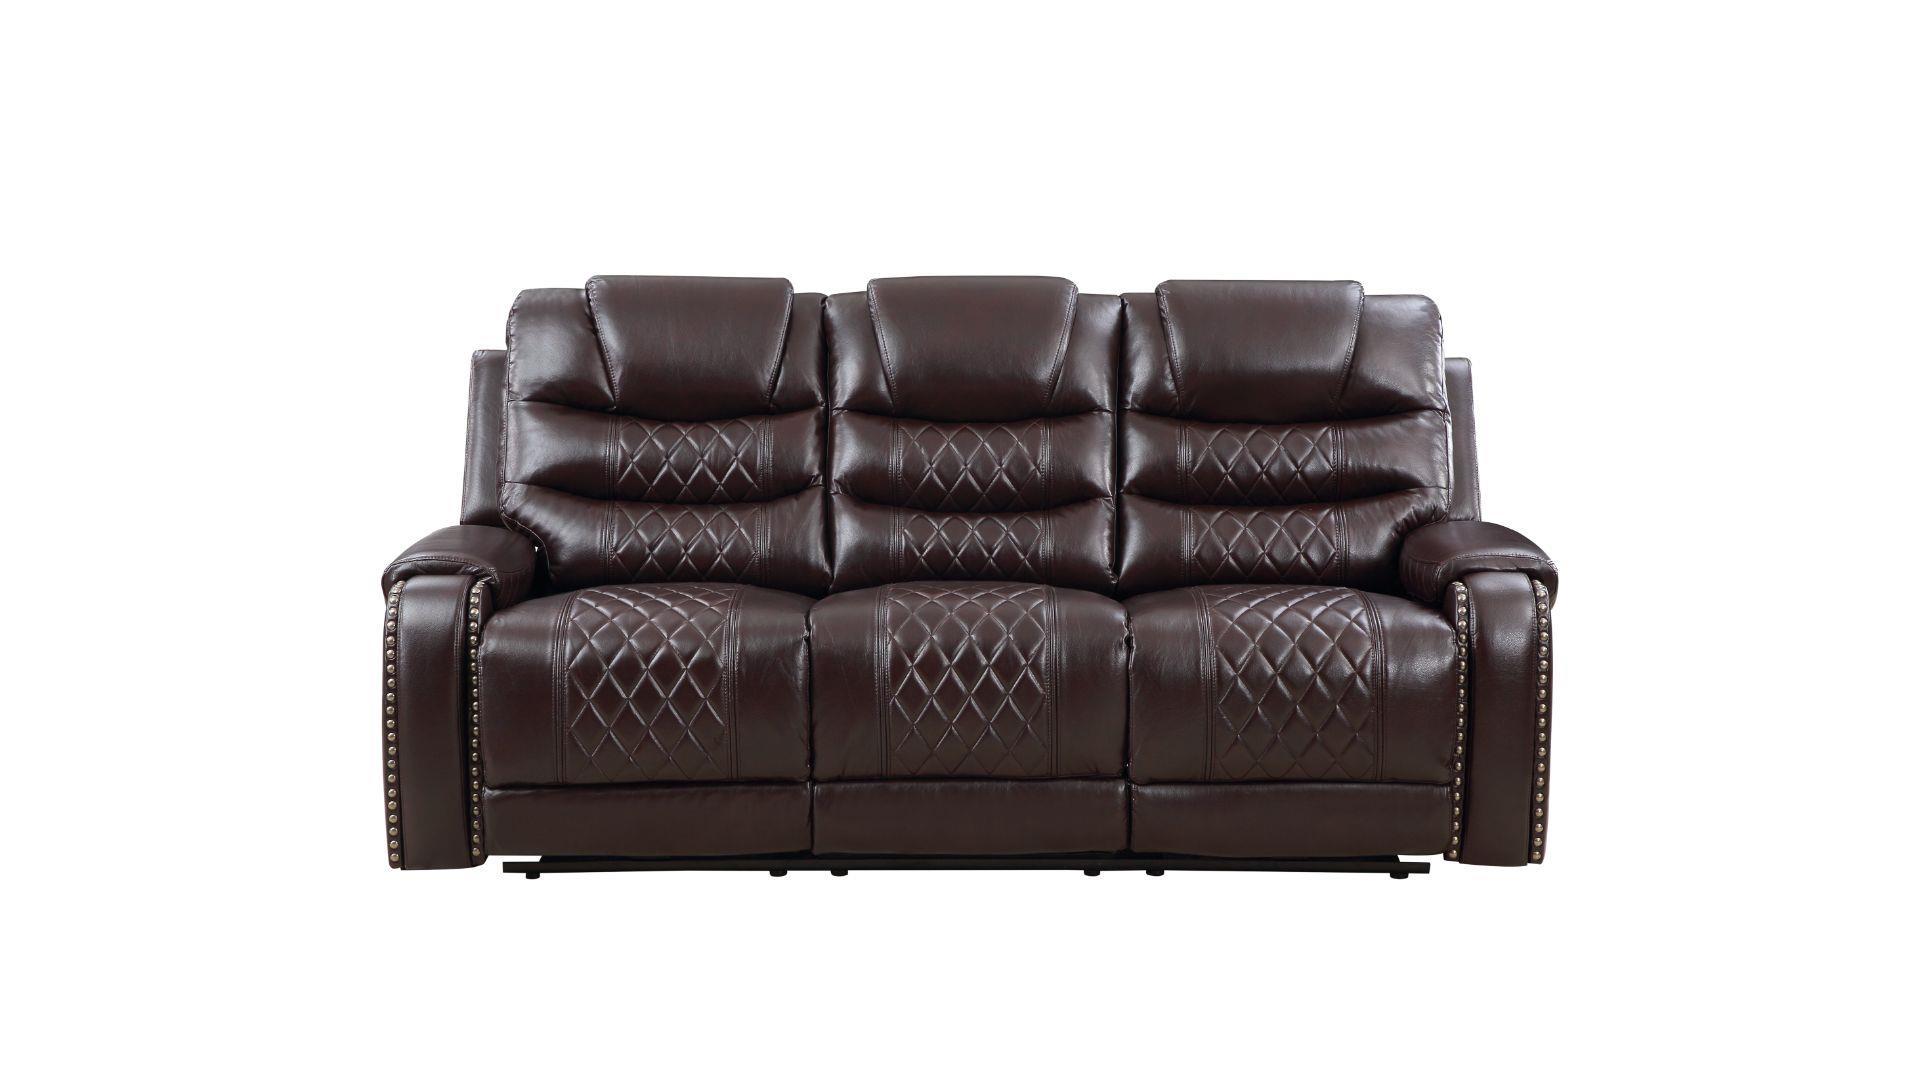 Contemporary, Modern Recliner Sofa TENNESSEE-BR TENNESSEE-BR-S in Espresso Eco Leather